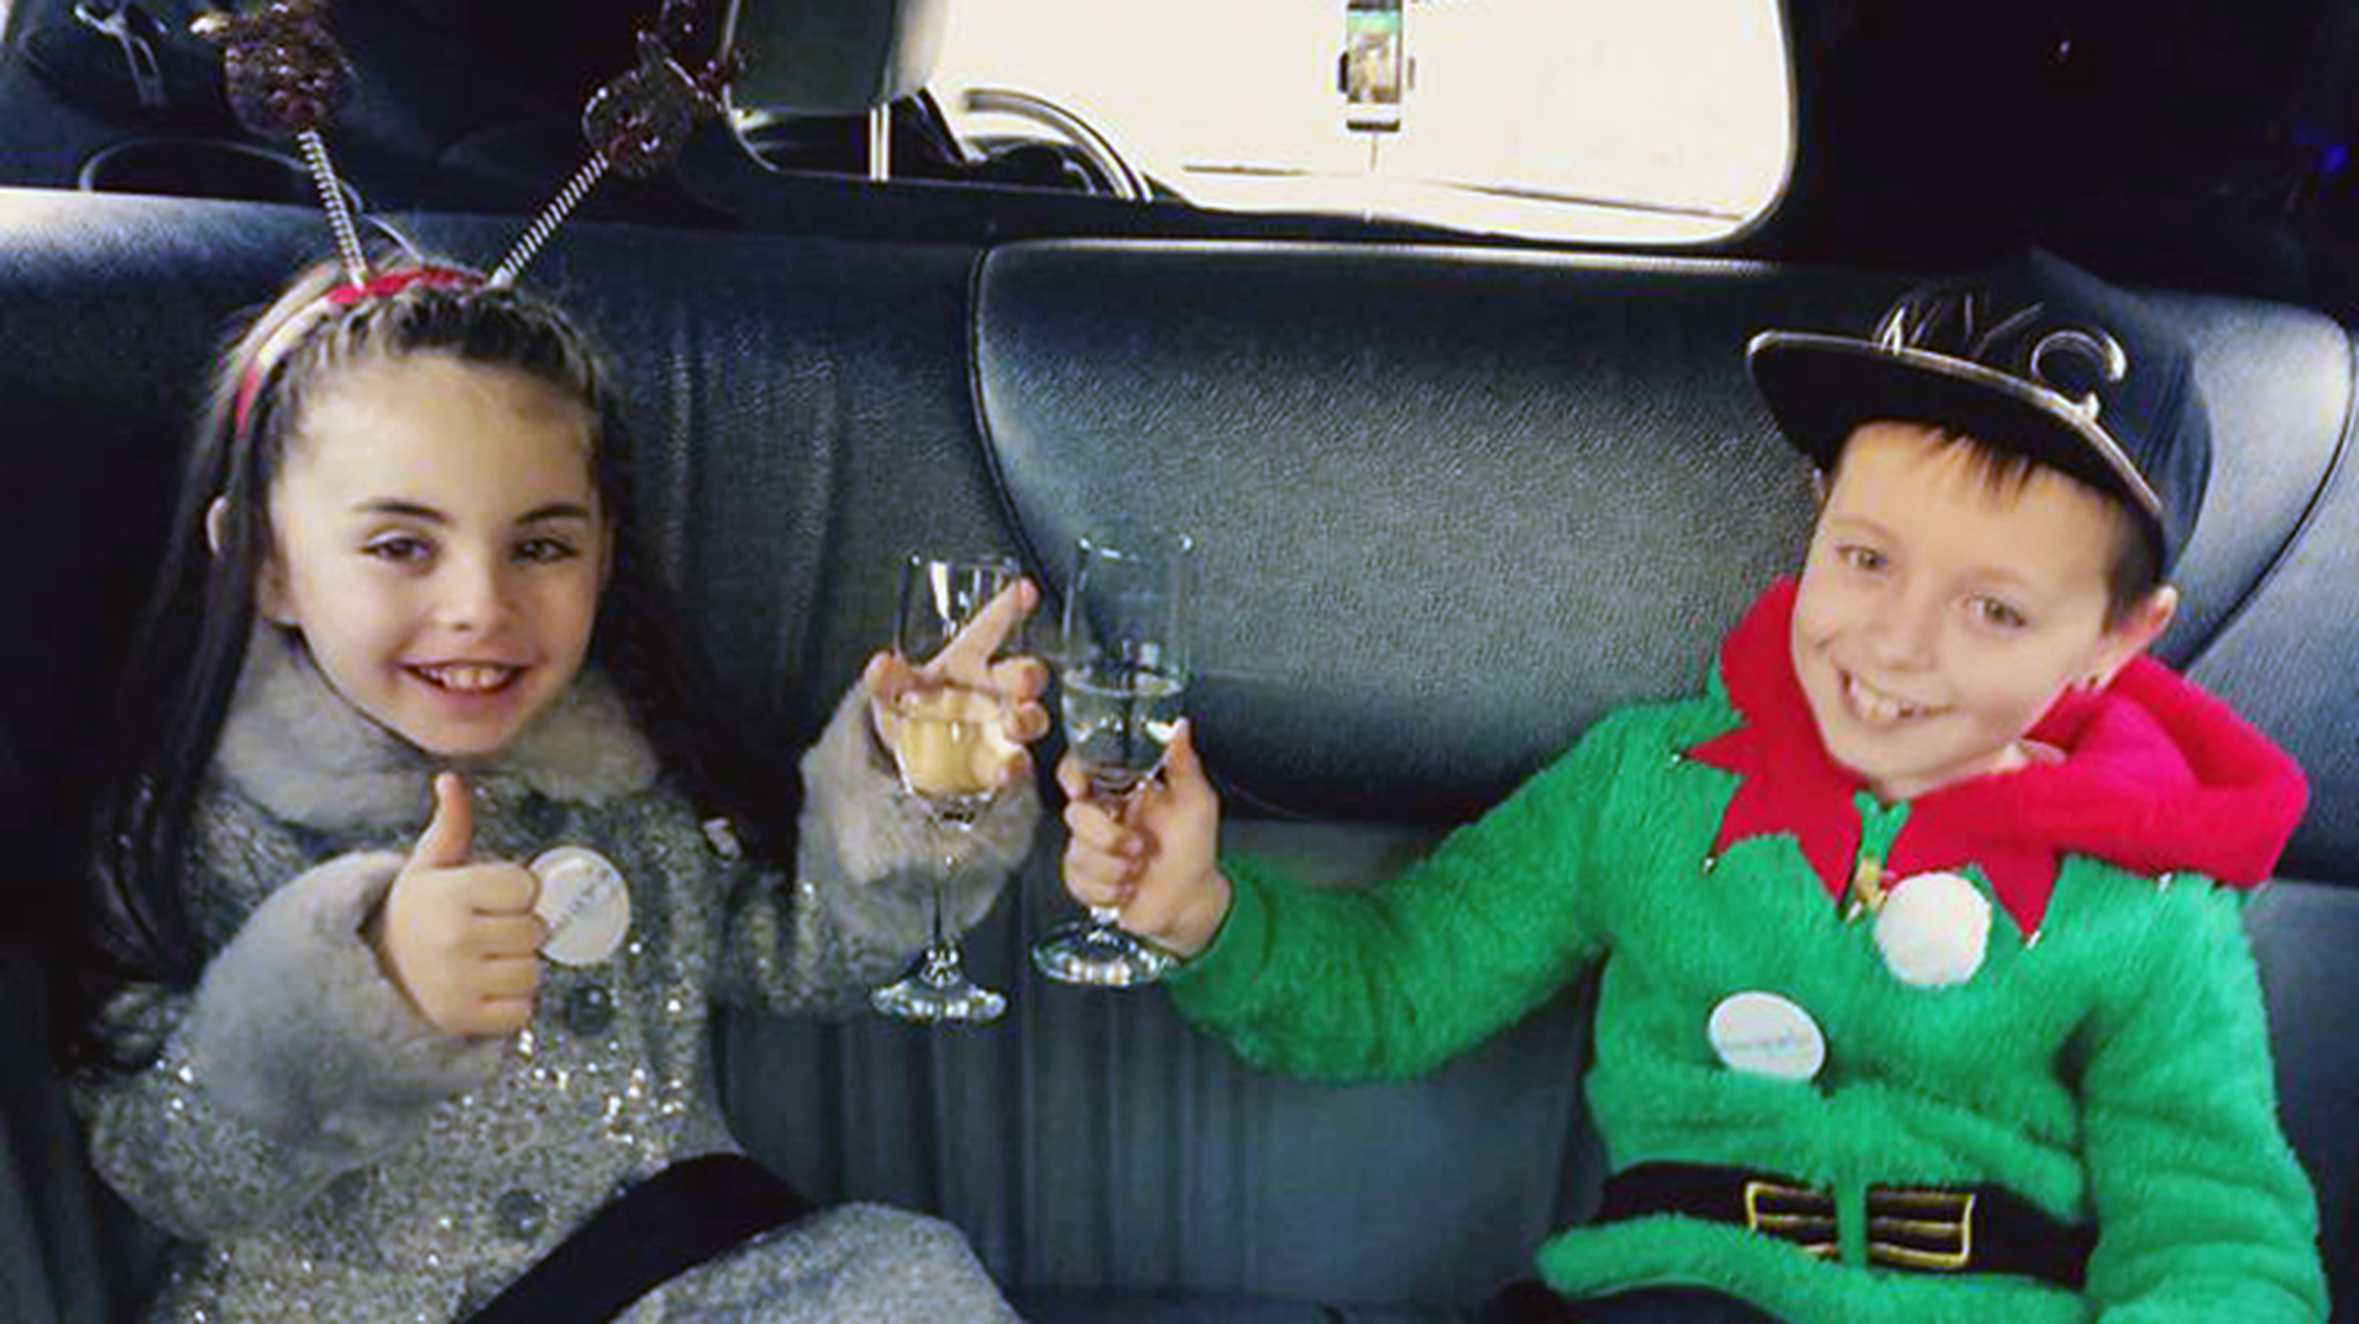 Ella and her brother cheersing lemonade in a limo